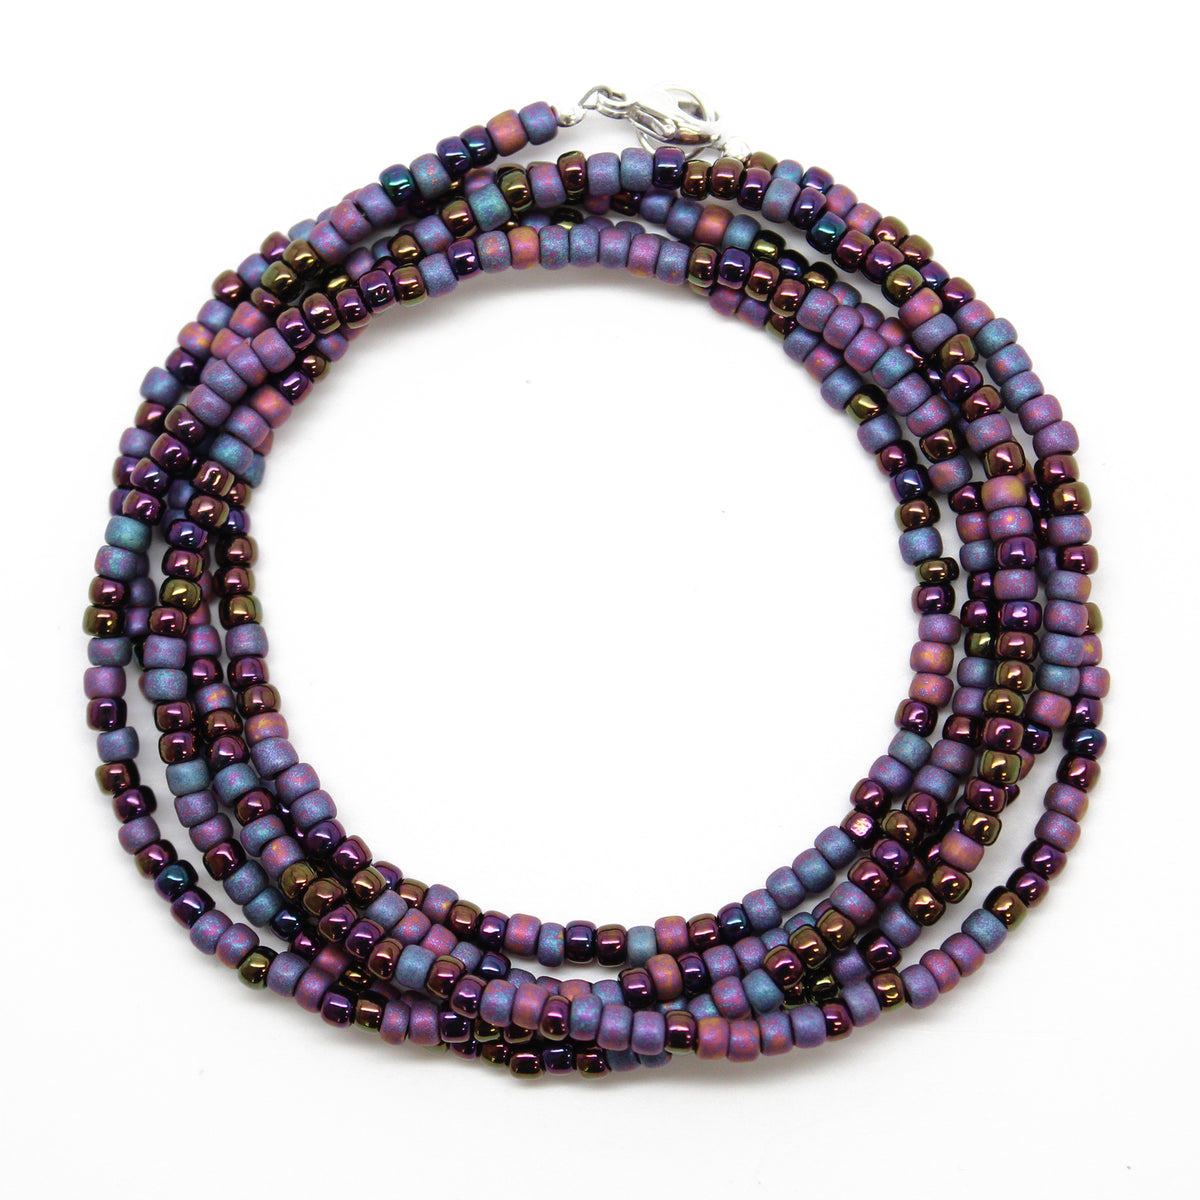 Mixed Beads Strand Necklace Purple/Blue Paddle Board